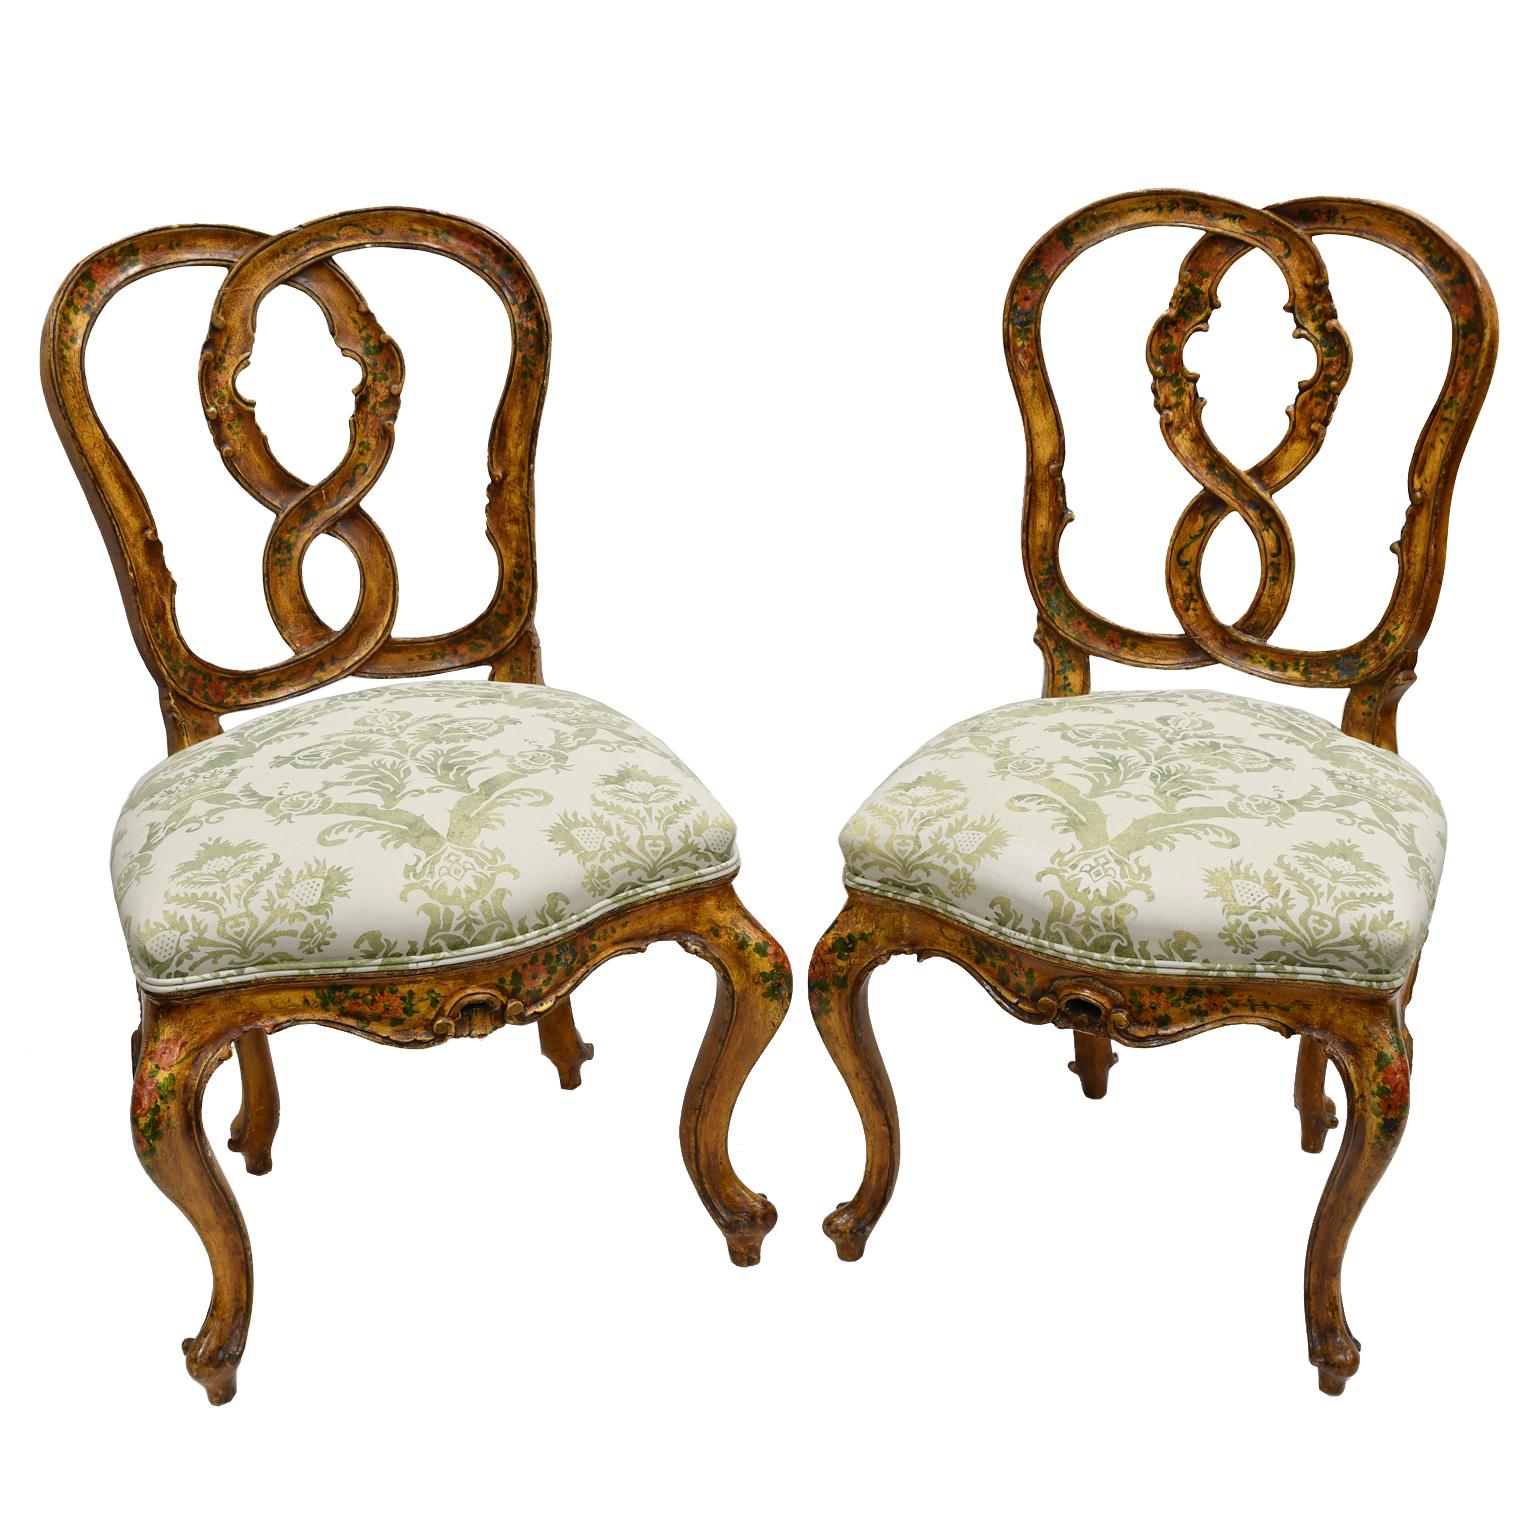 A charming pair of Venetian his & hers dining chairs with one chair being slightly larger than the other. Wooden frames have a glazed yellow-ochre paint with hand-painted flowers and feature figure eight backs, cabriole legs and upholstered seats.